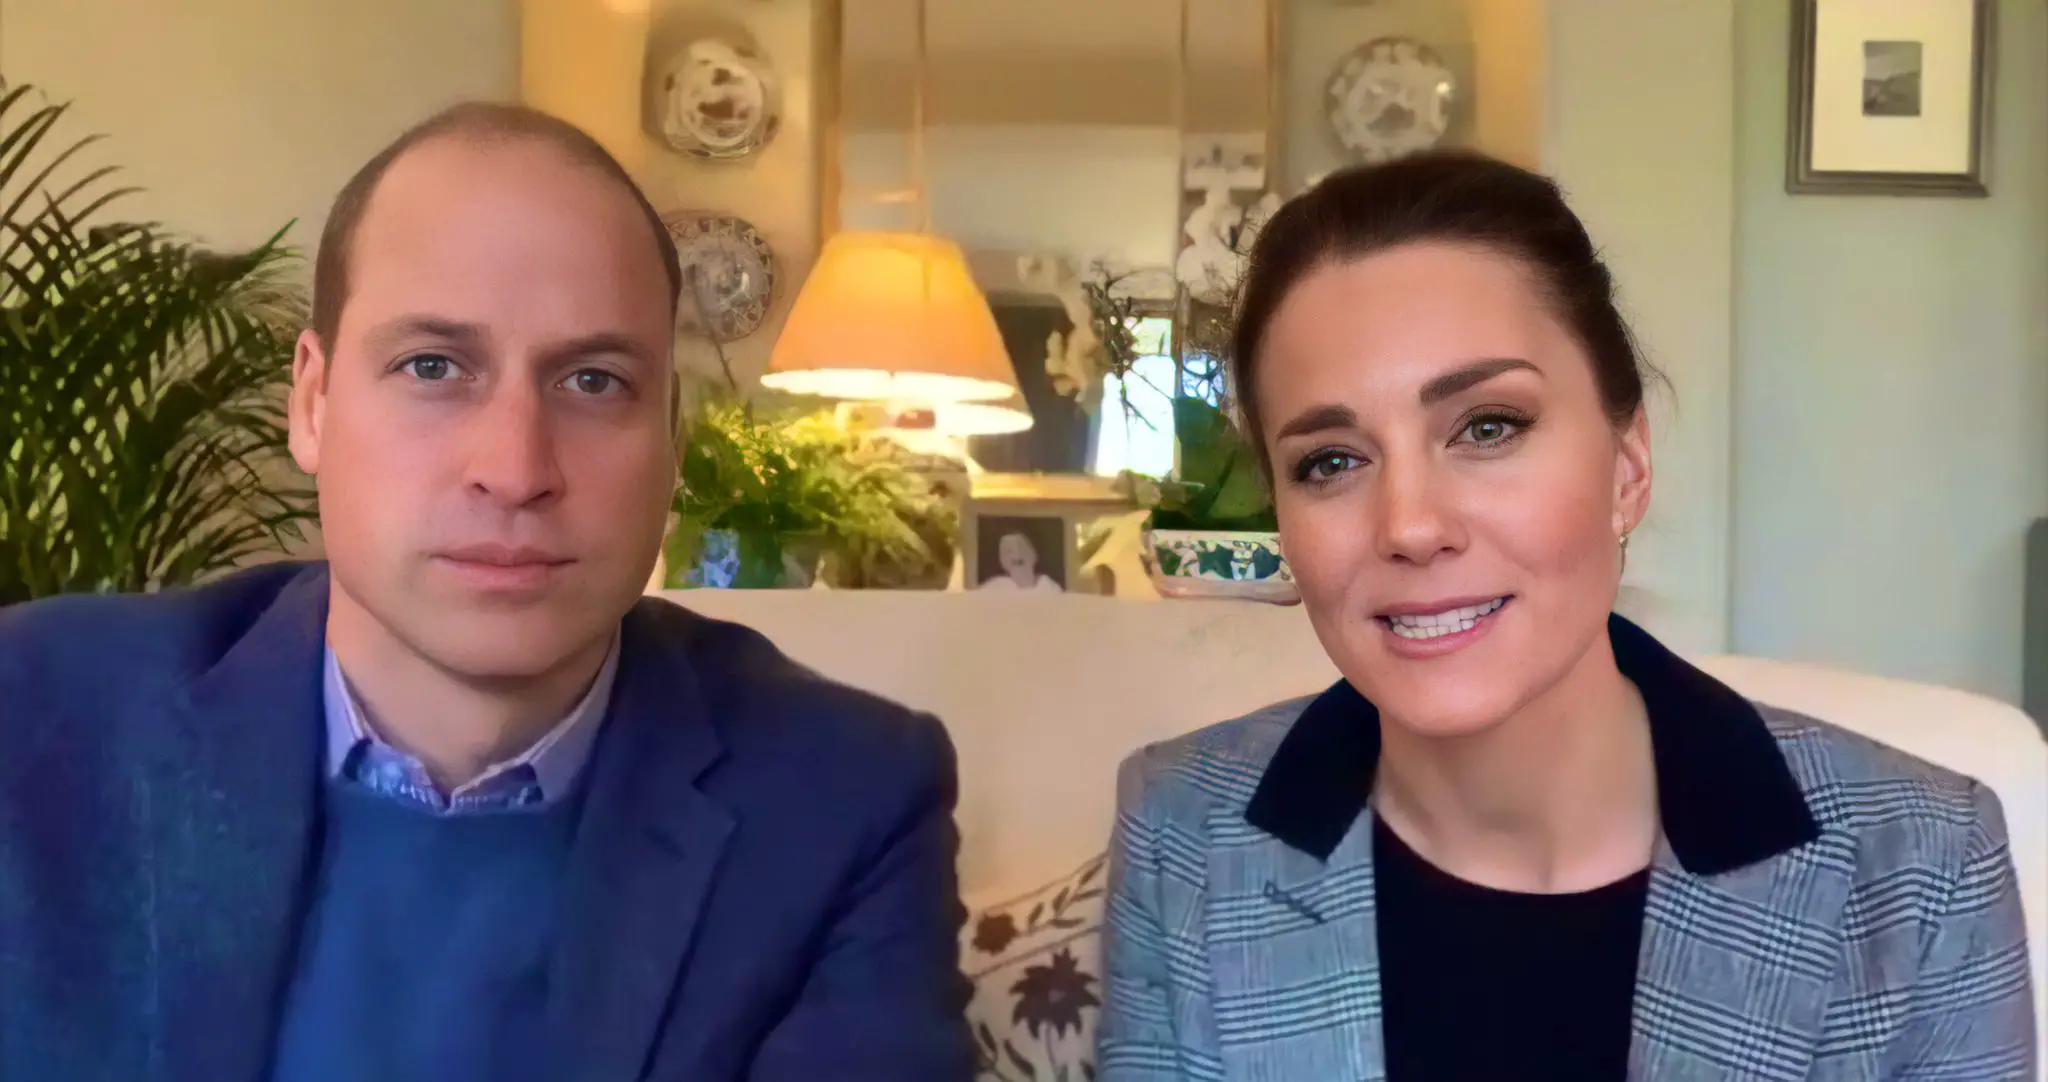 The Duchess of Cambridge will be undertaking virtual engagements in early 2021